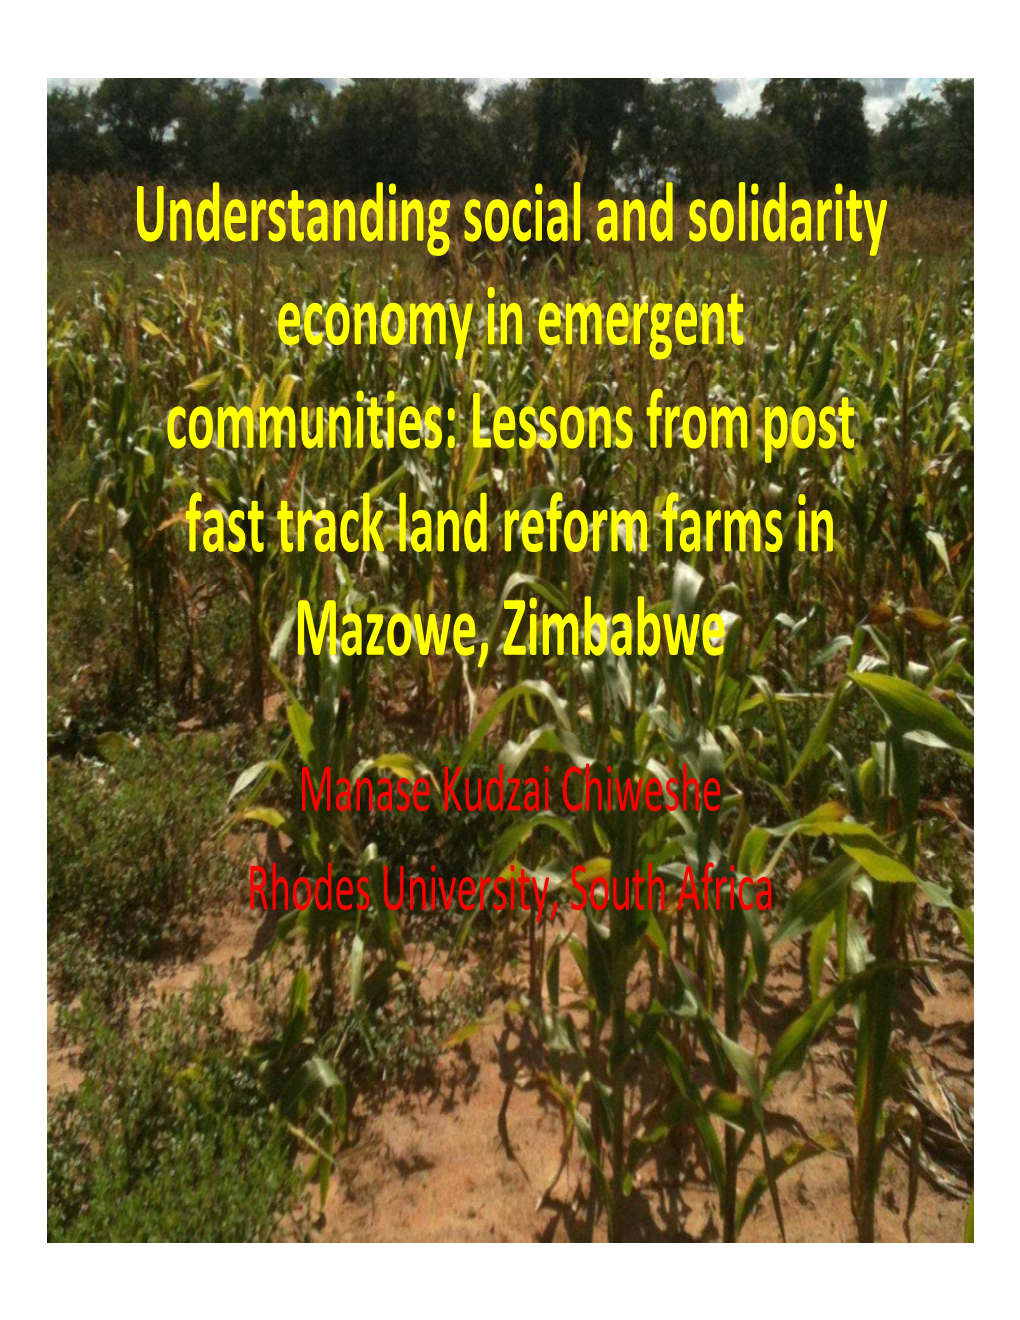 Lessons from Post Fast Track Land Reform Farms in Mazowe, Zimbabwe